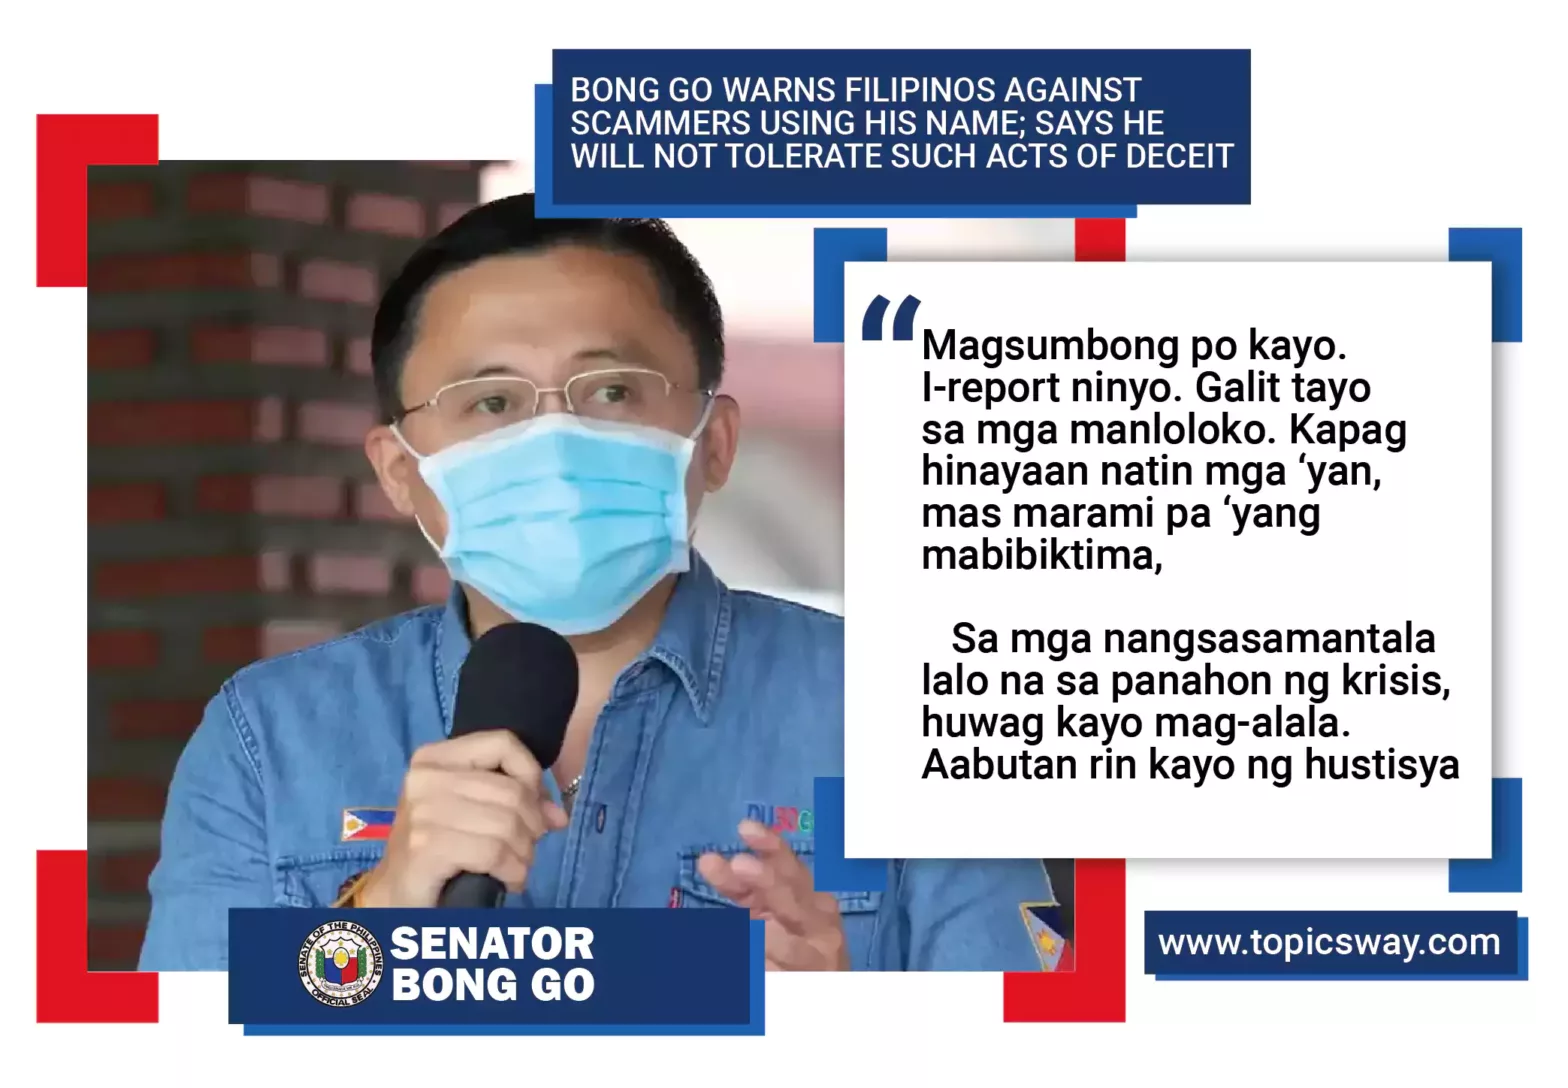 BONG GO WARNS FILIPINOS AGAINST SCAMMERS